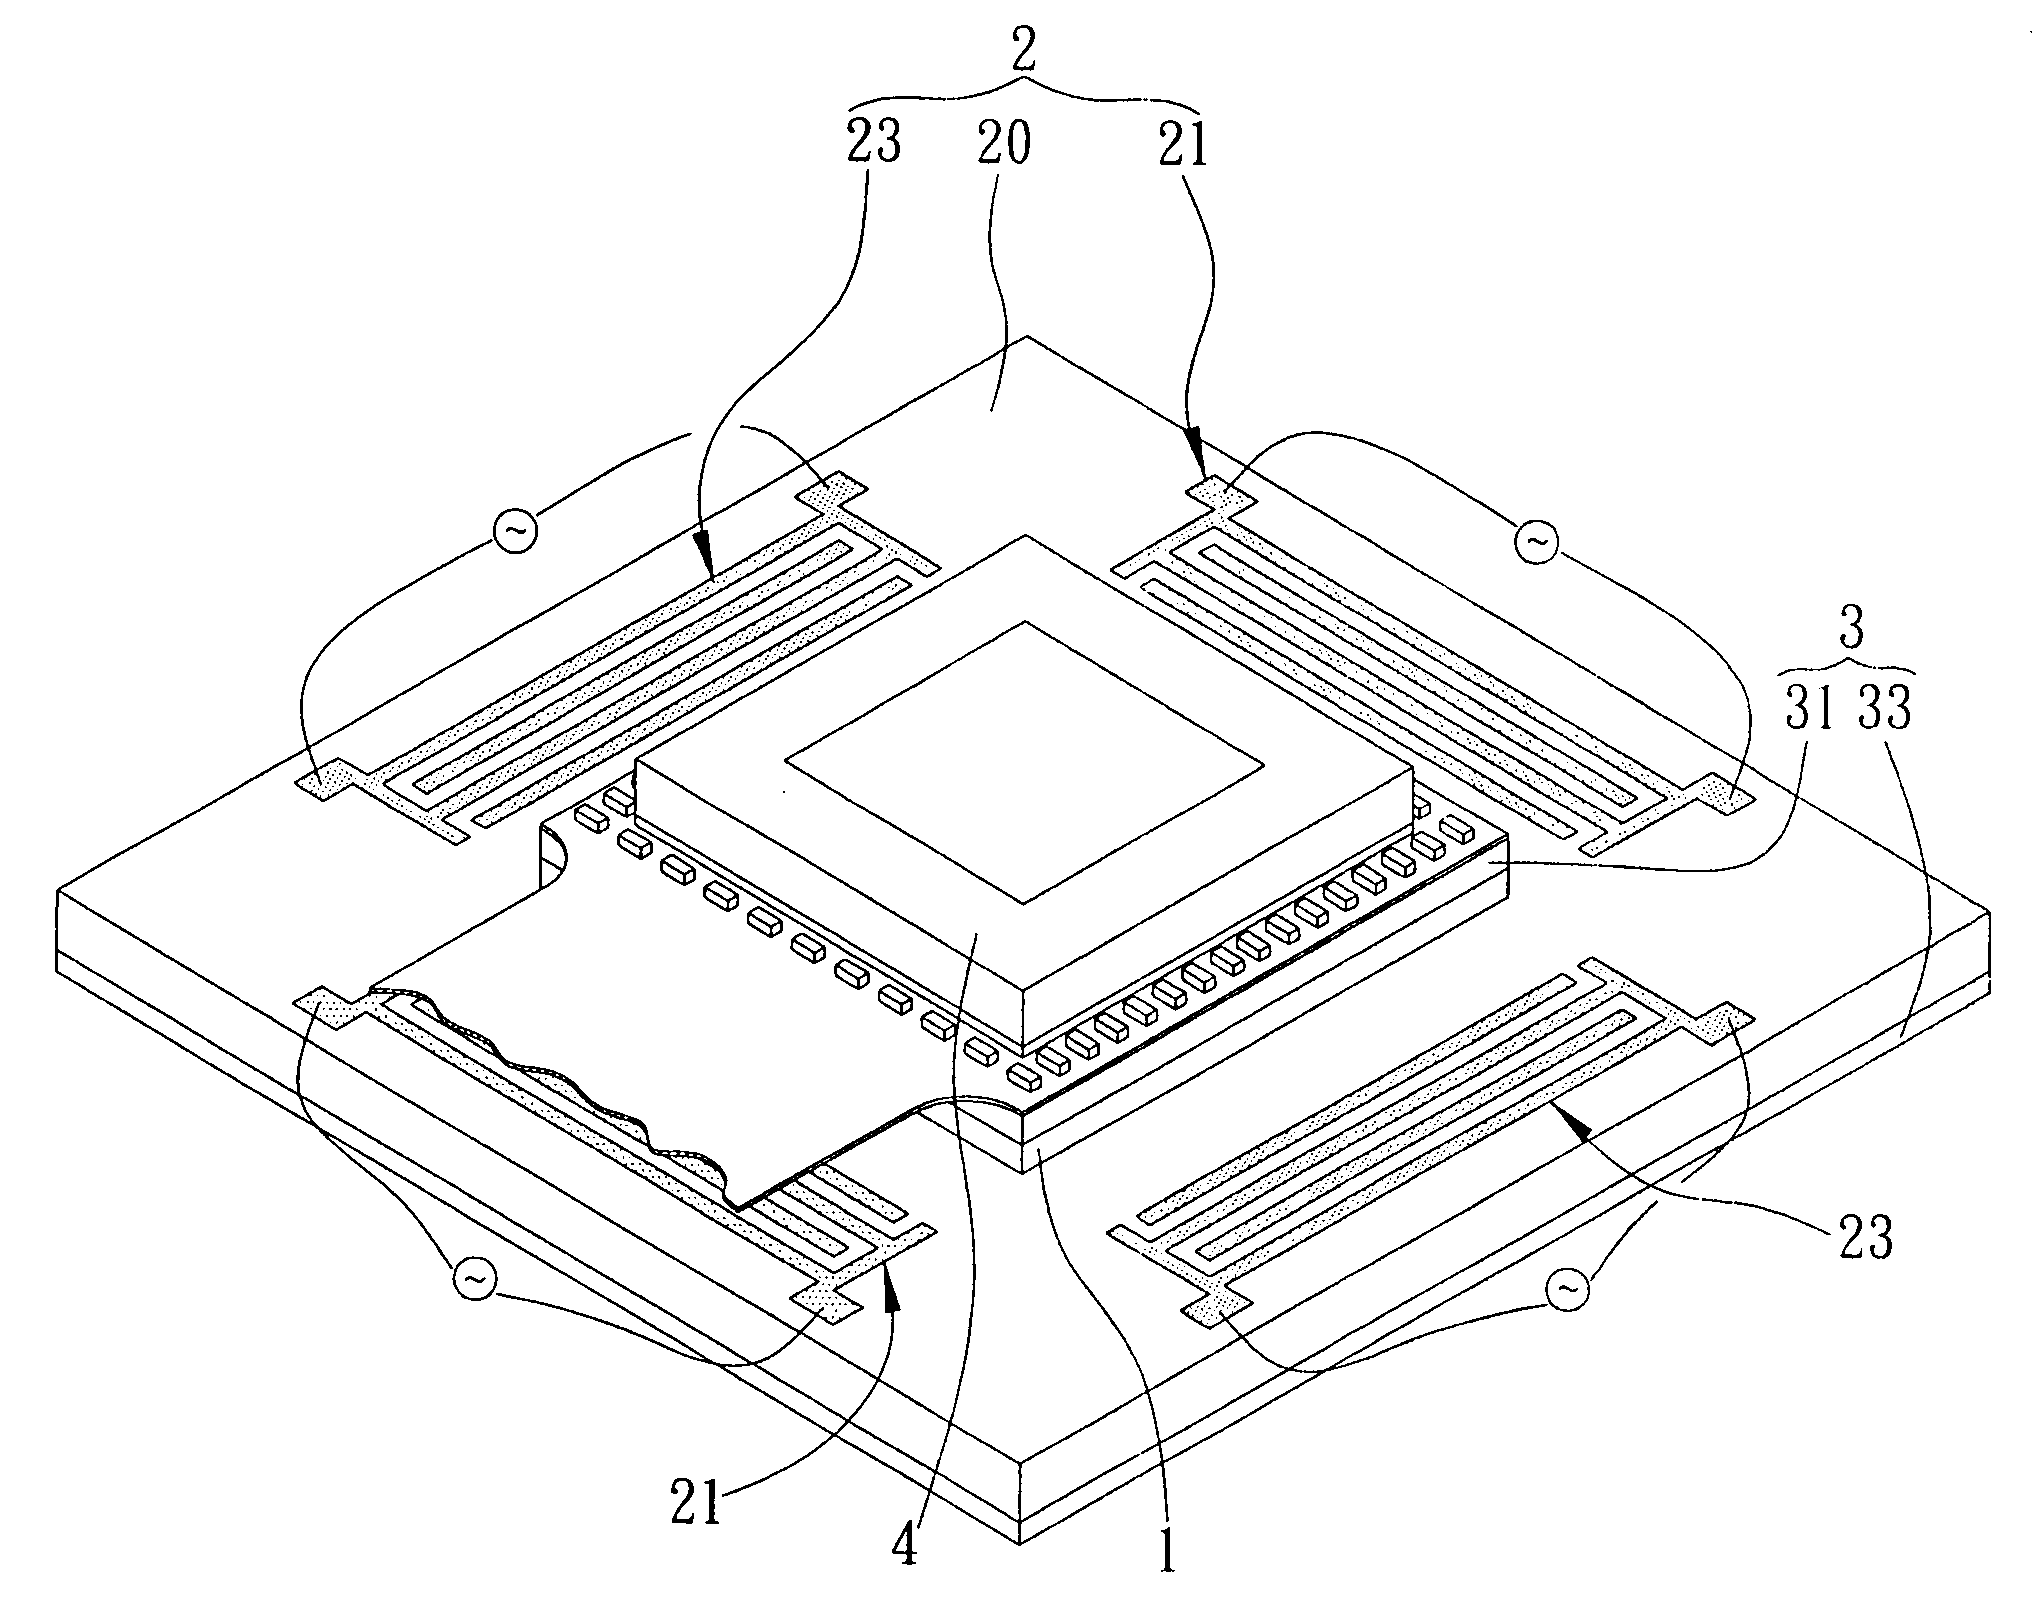 Image stabilization driving device